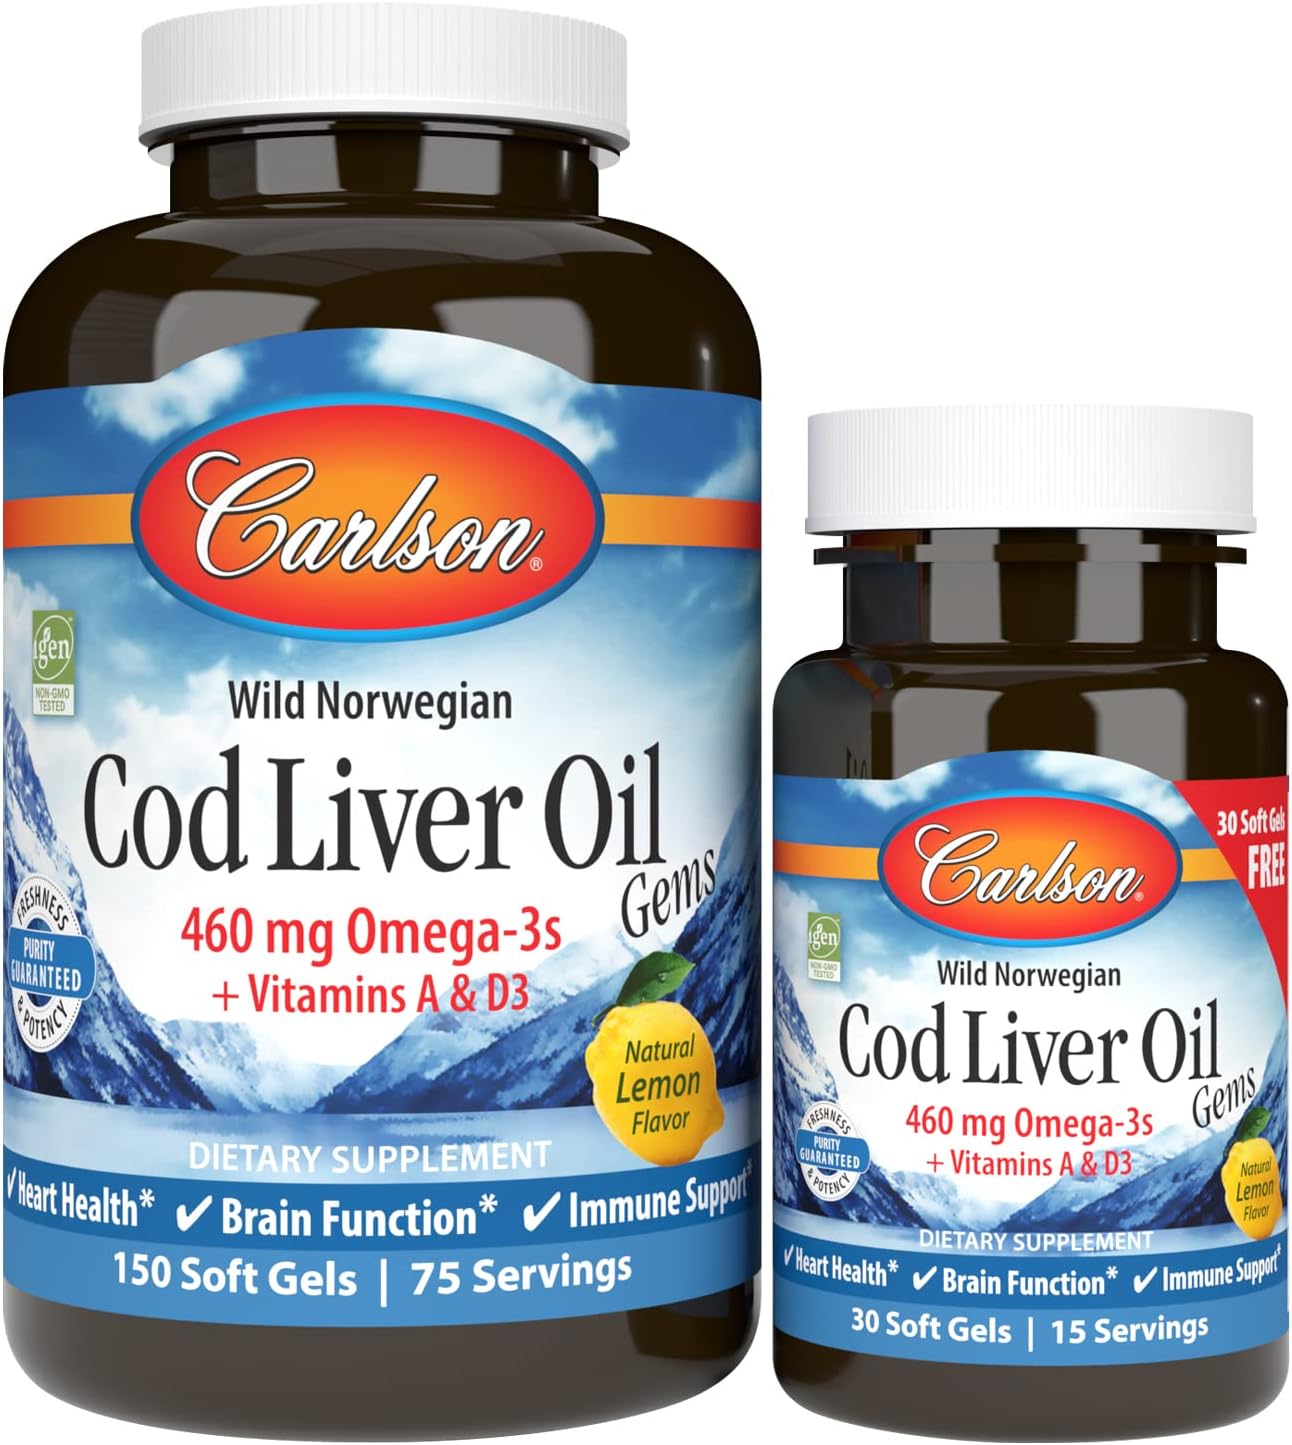 Carlson - Cod Liver Oil Gems, 460 mg Omega-3s, Plus Vitamins A and D3, Wild Caught Norwegian Arctic Cod Liver Oil, Sustainably Sourced Nordic Fish Oil Capsules, Lemon, 150 + 30 Softgels